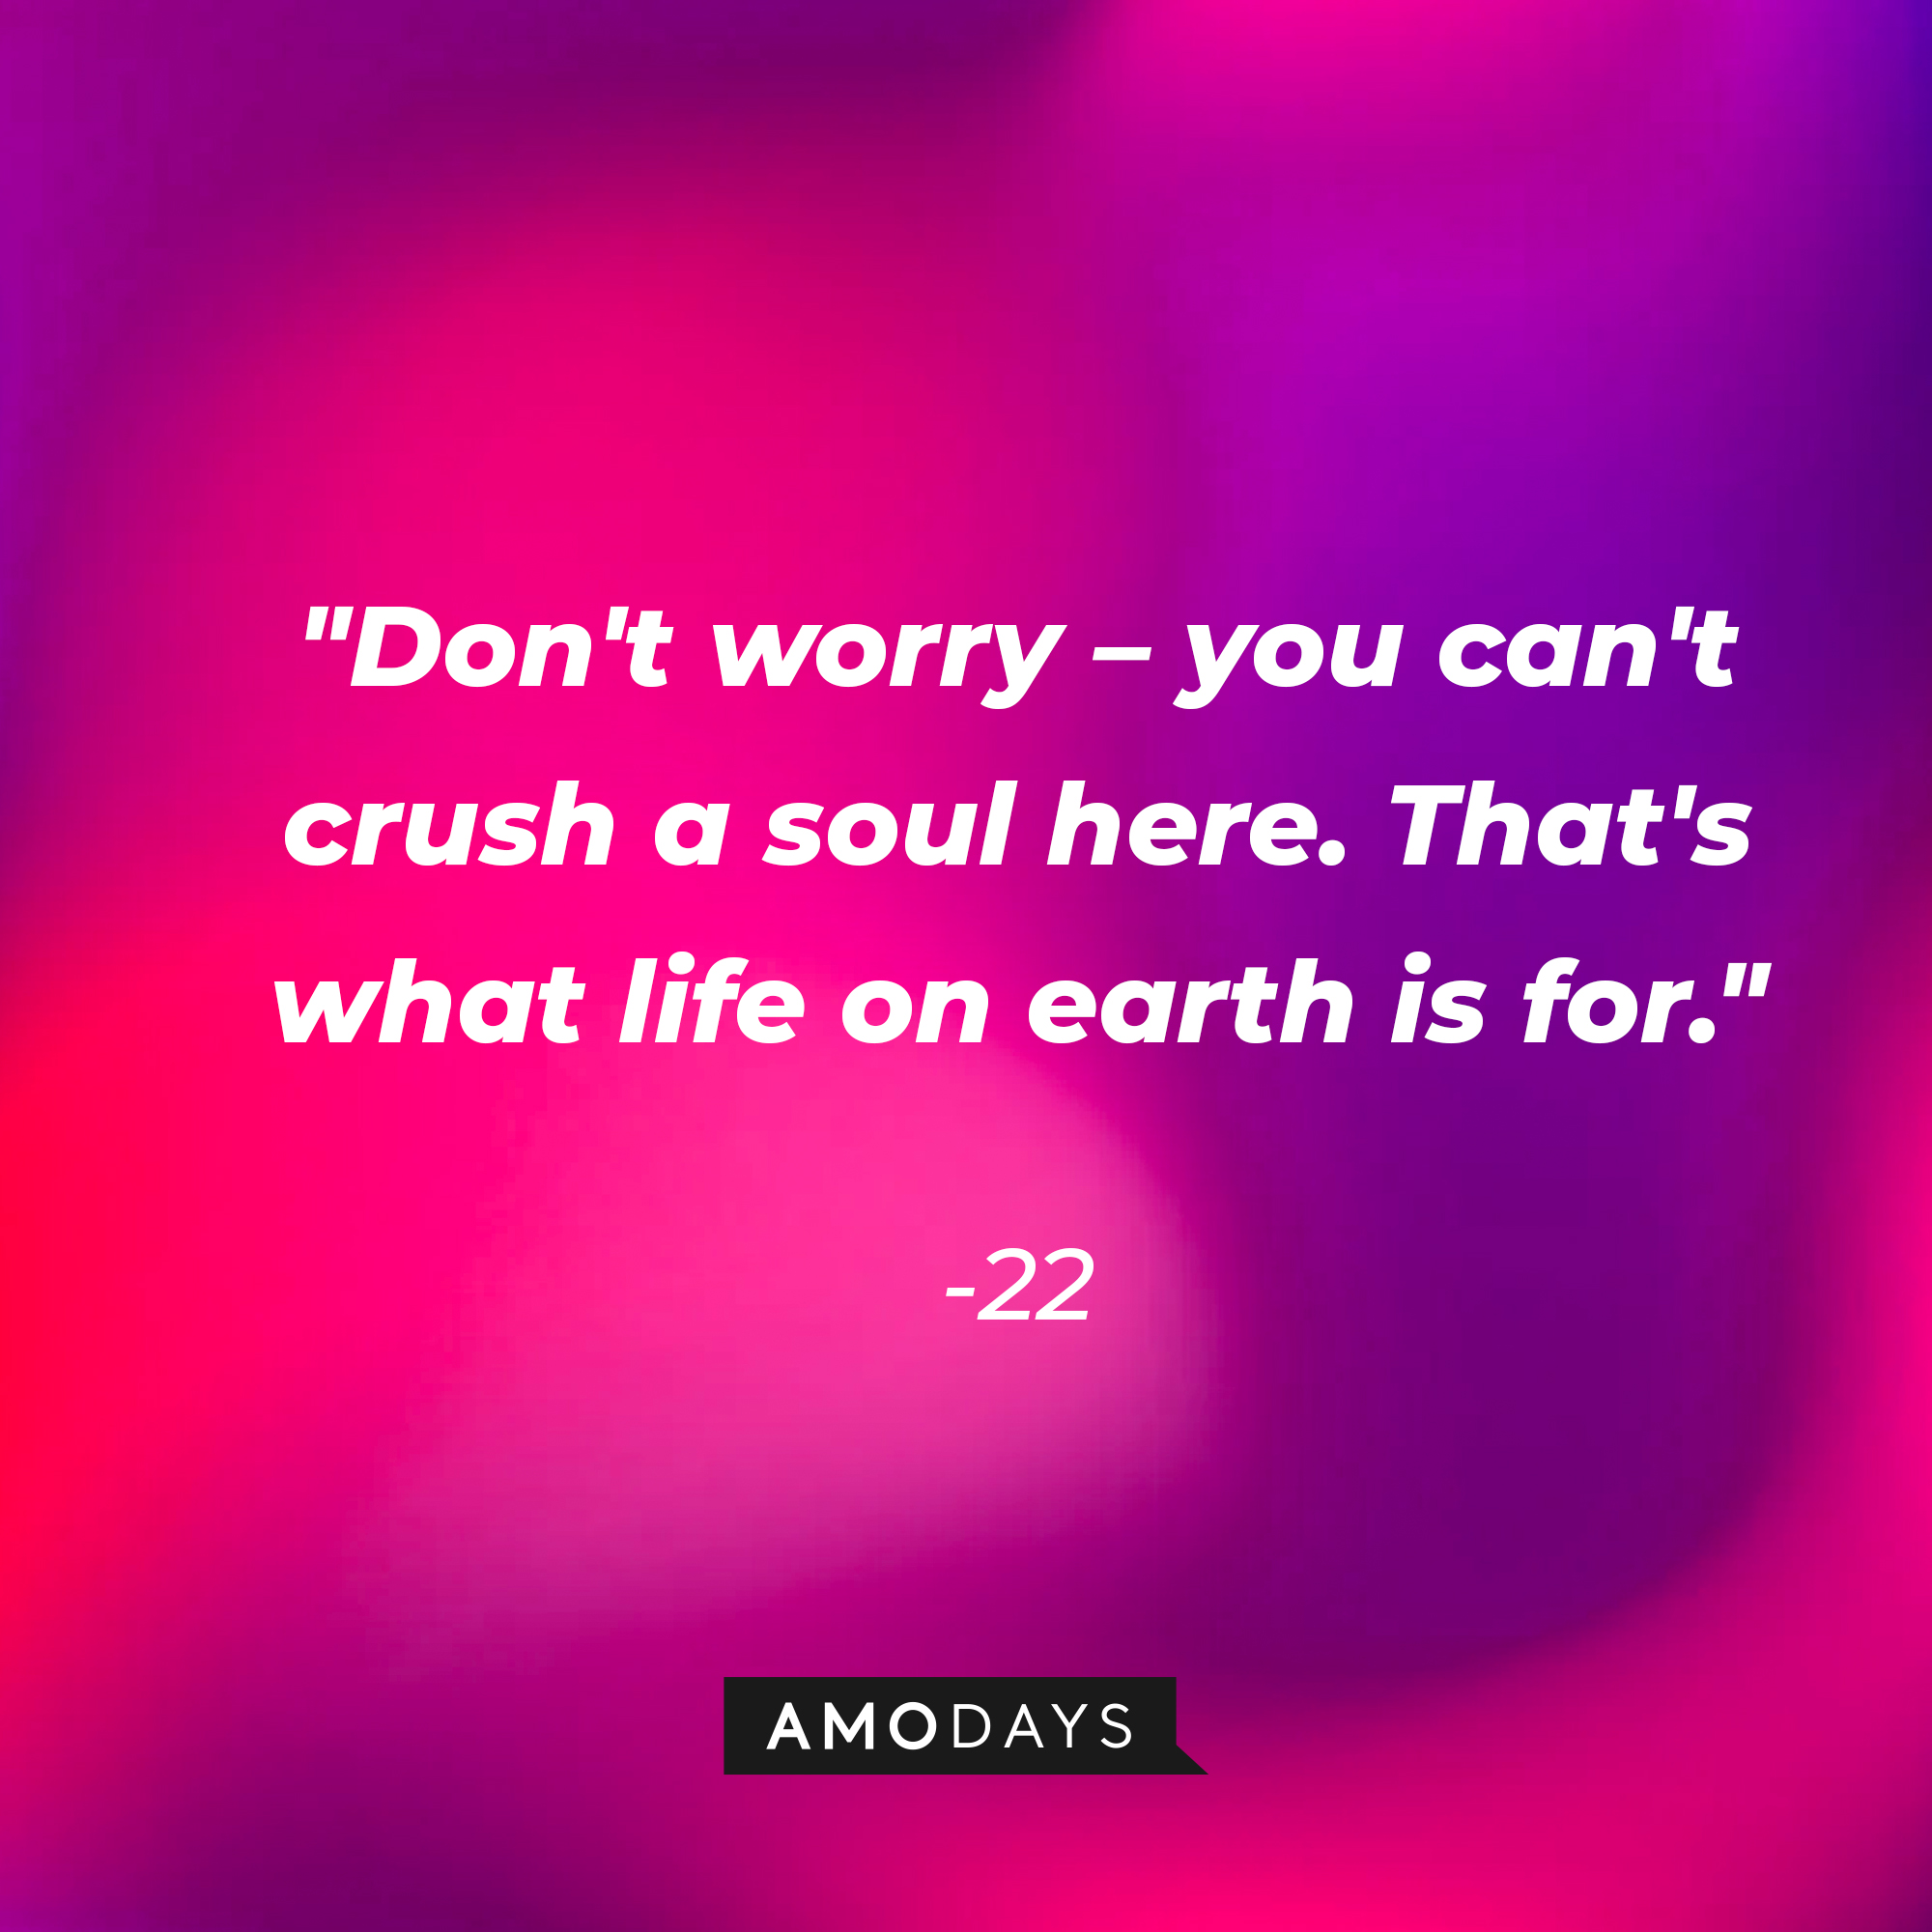 22's quote: "Don't worry – you can't crush a soul here. That's what life on earth is for." | Source: youtube.com/pixar